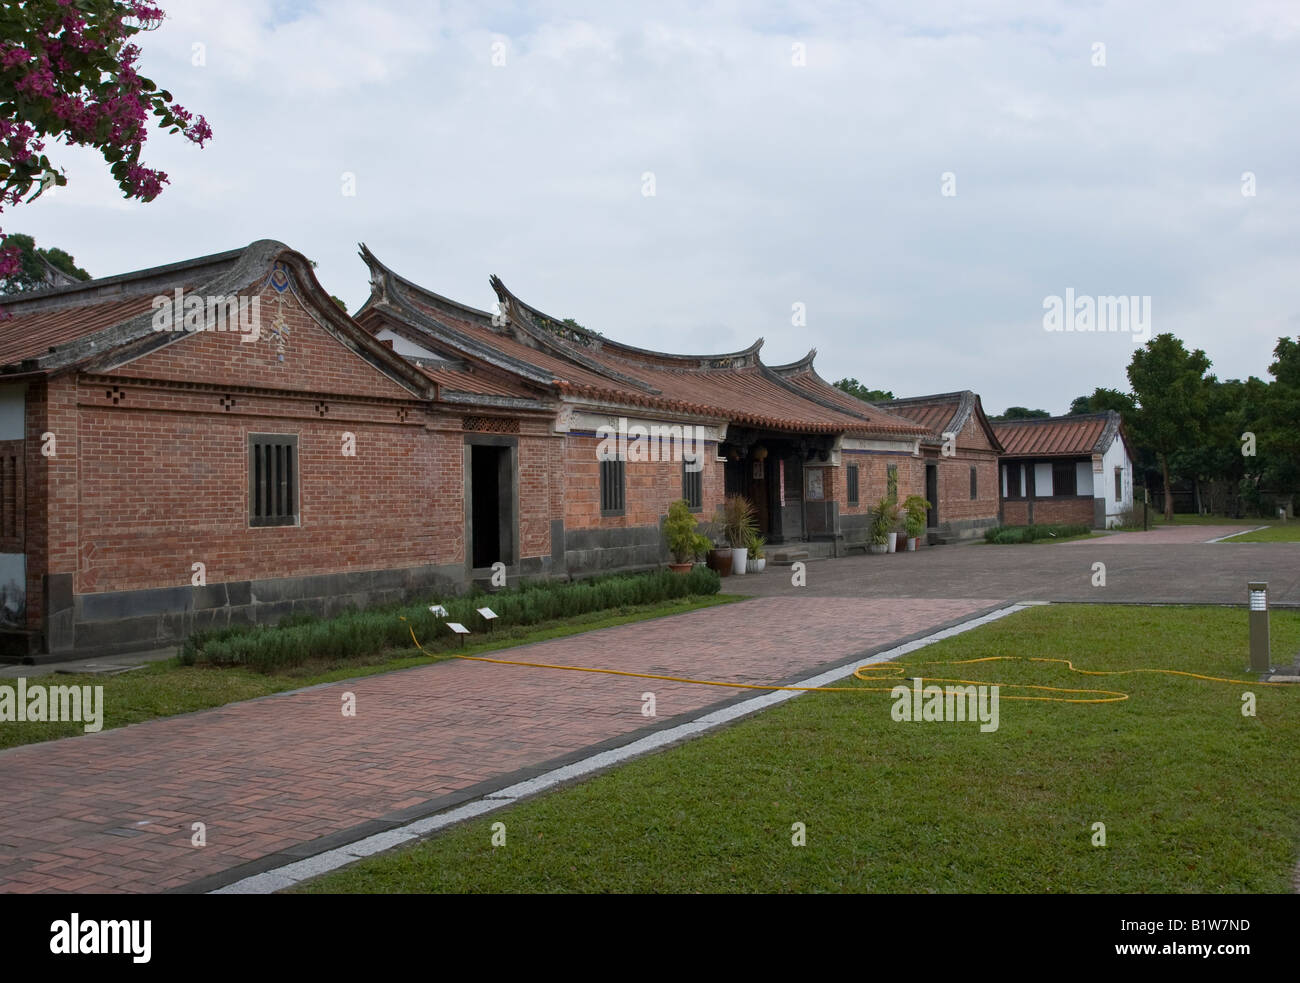 Lin Antai Old House The oldest residential building in Taipei this 30 room Fujian style house was built between 1783 and 1787. Stock Photo